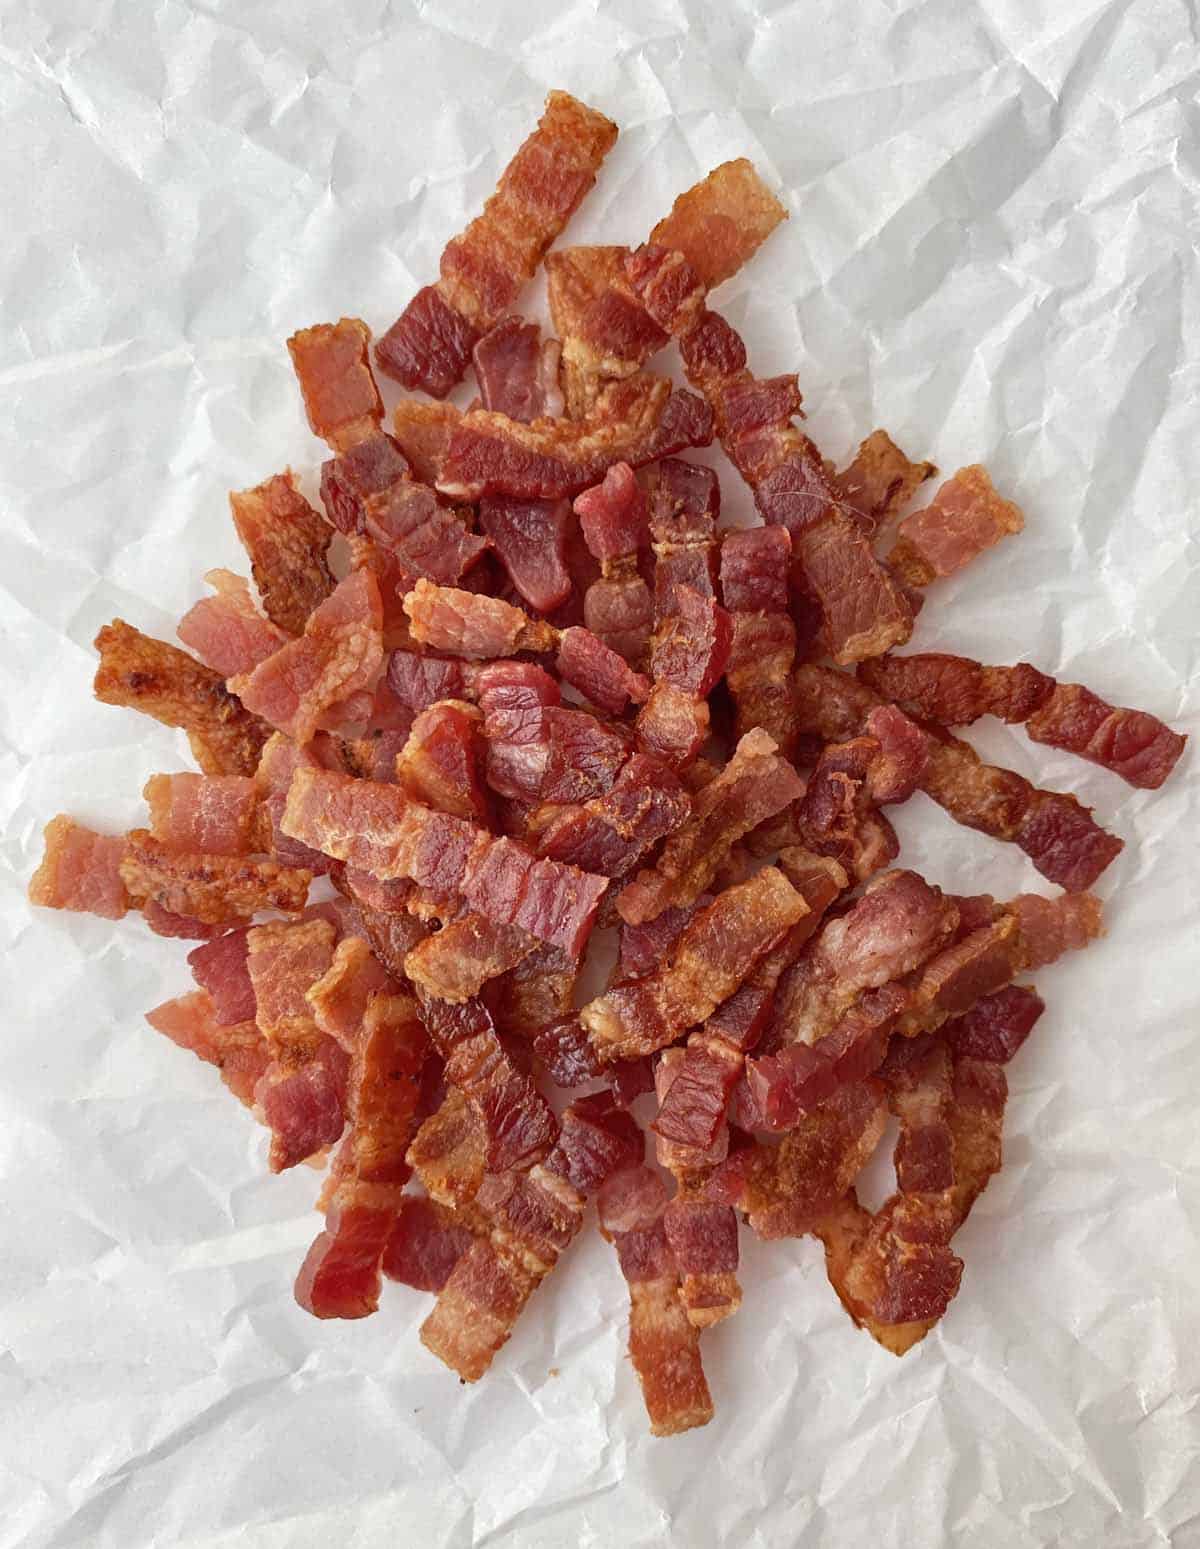 Finished bacon lardons piled on a crumpled piece of parchment paper.